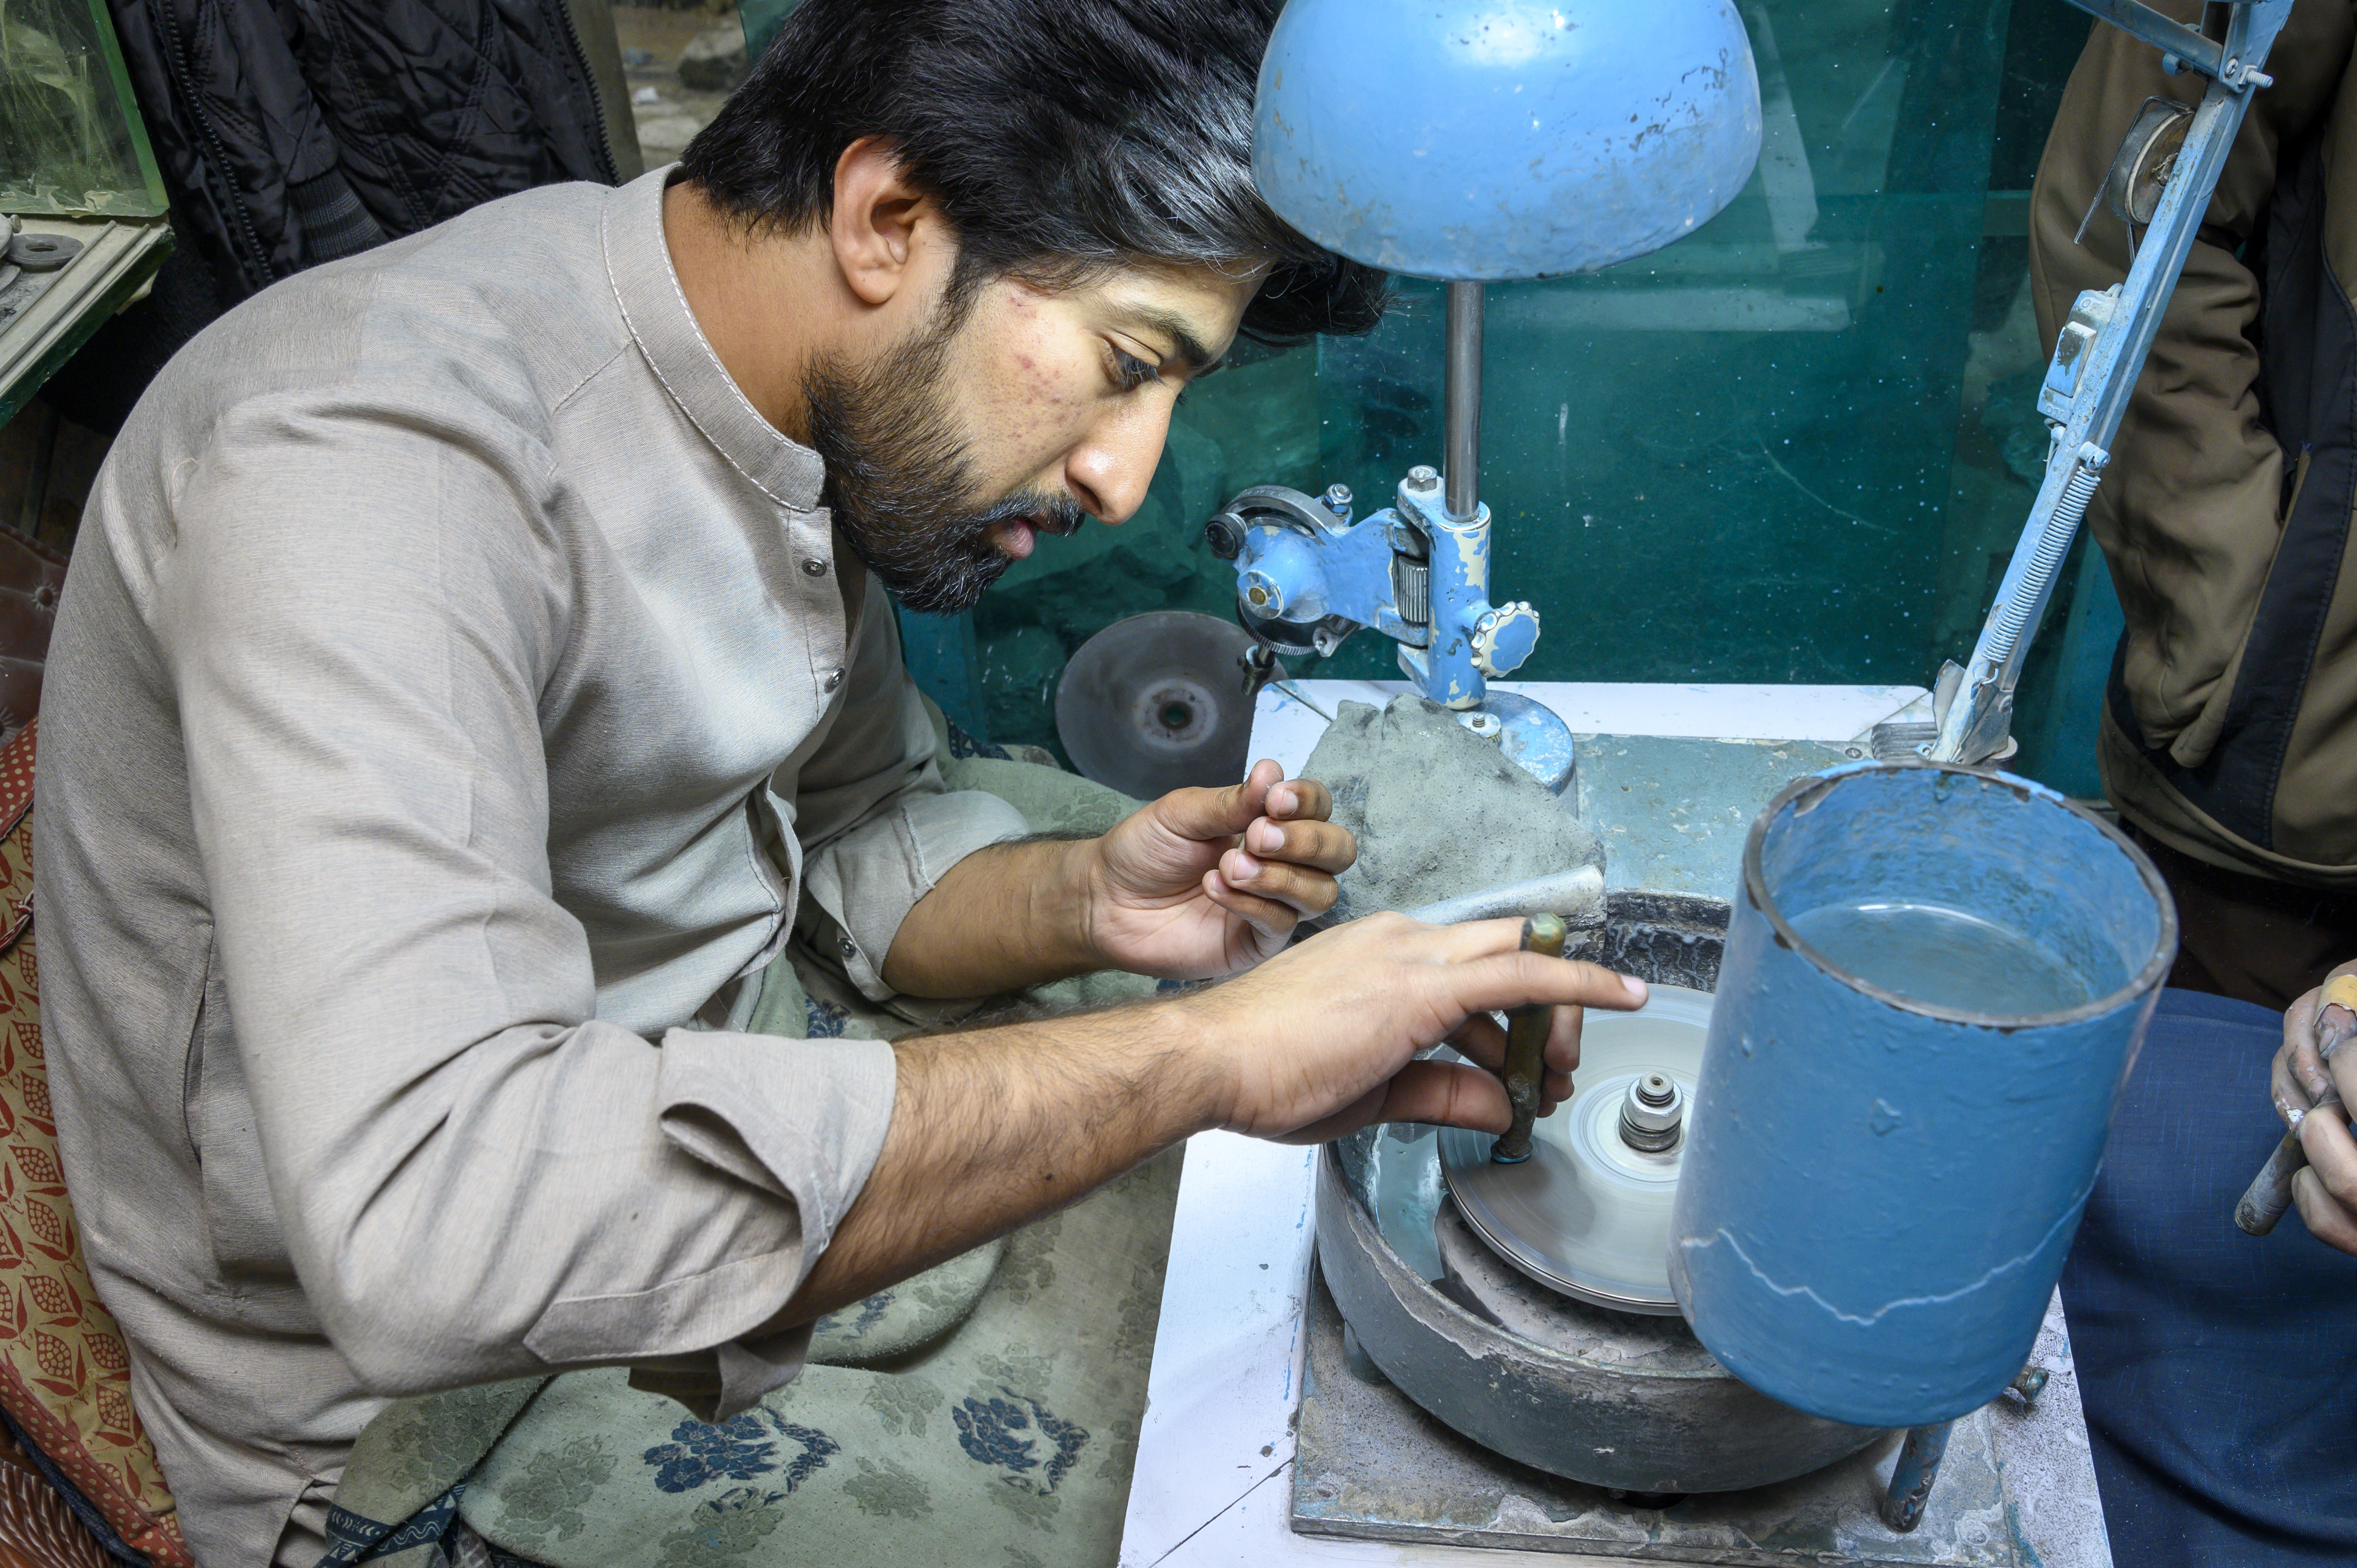 The Lapidarist busy in improving the quality of gemstones